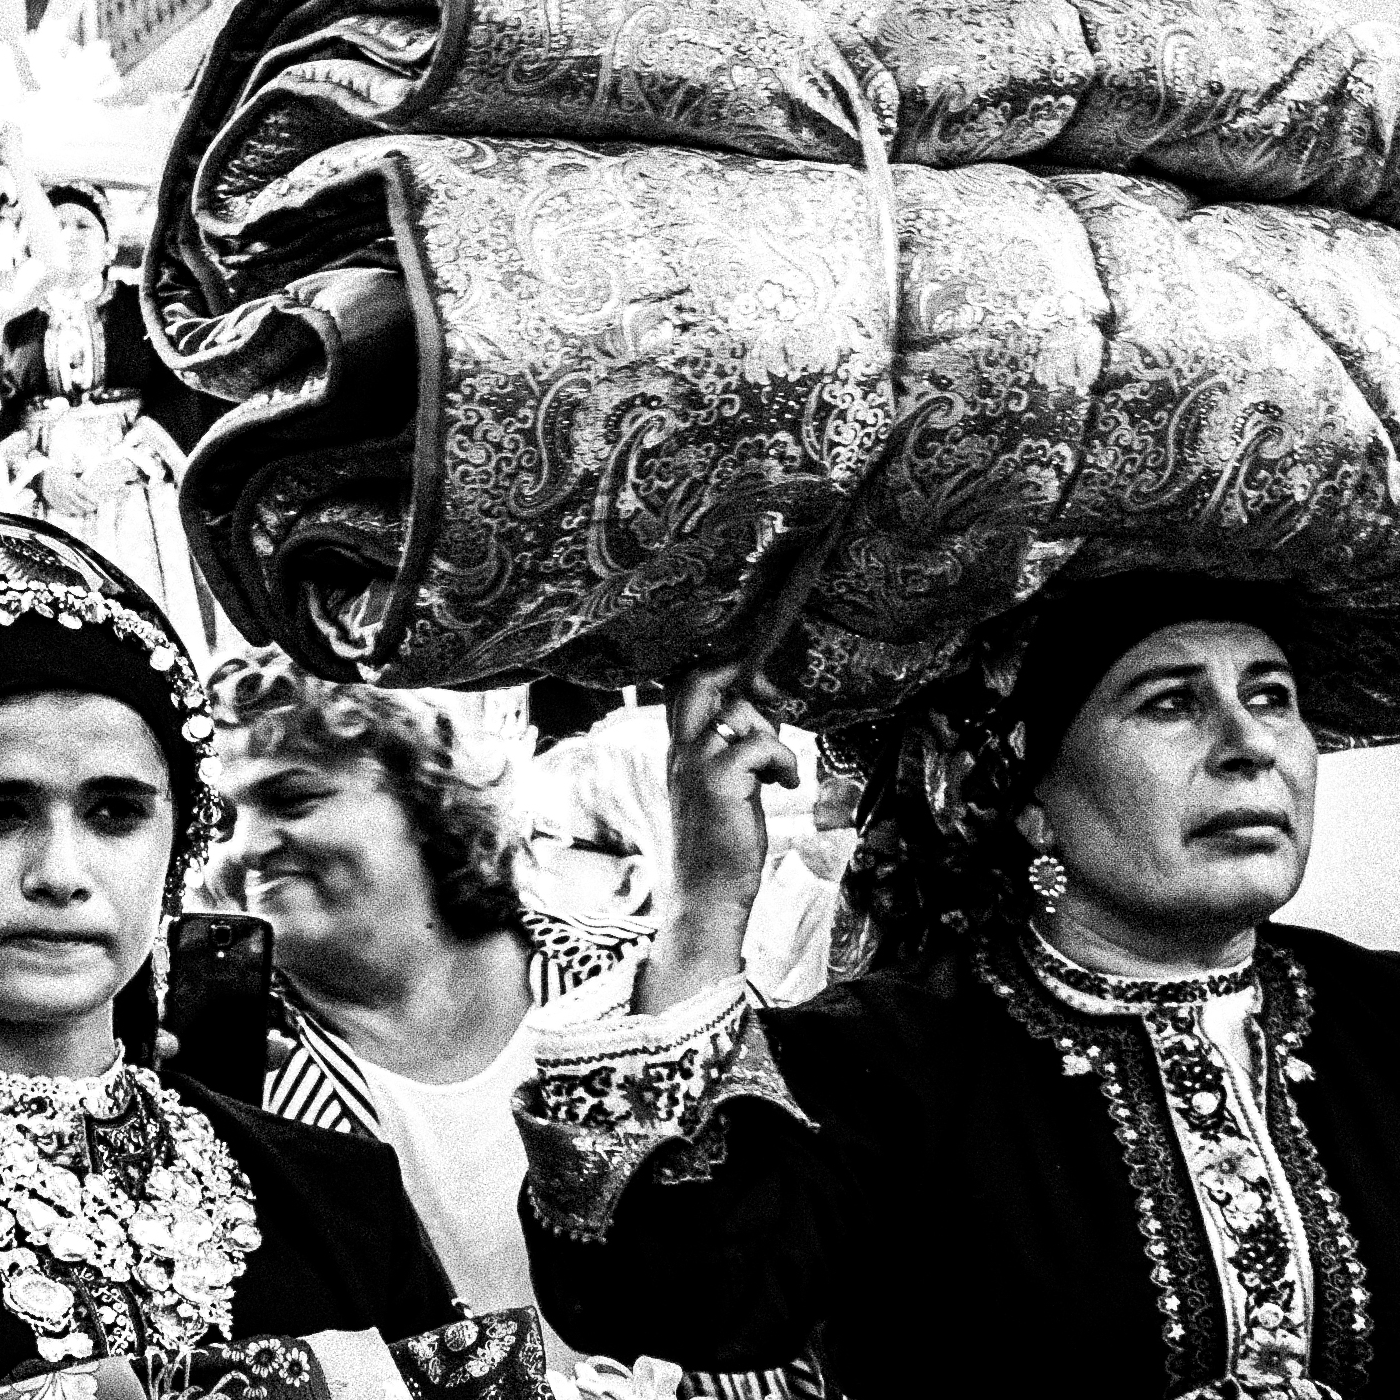 Black and White Photography Wall Art Greece | Dowry in the central square of Olympos Karpathos Dodecanese by George Tatakis - detailed view